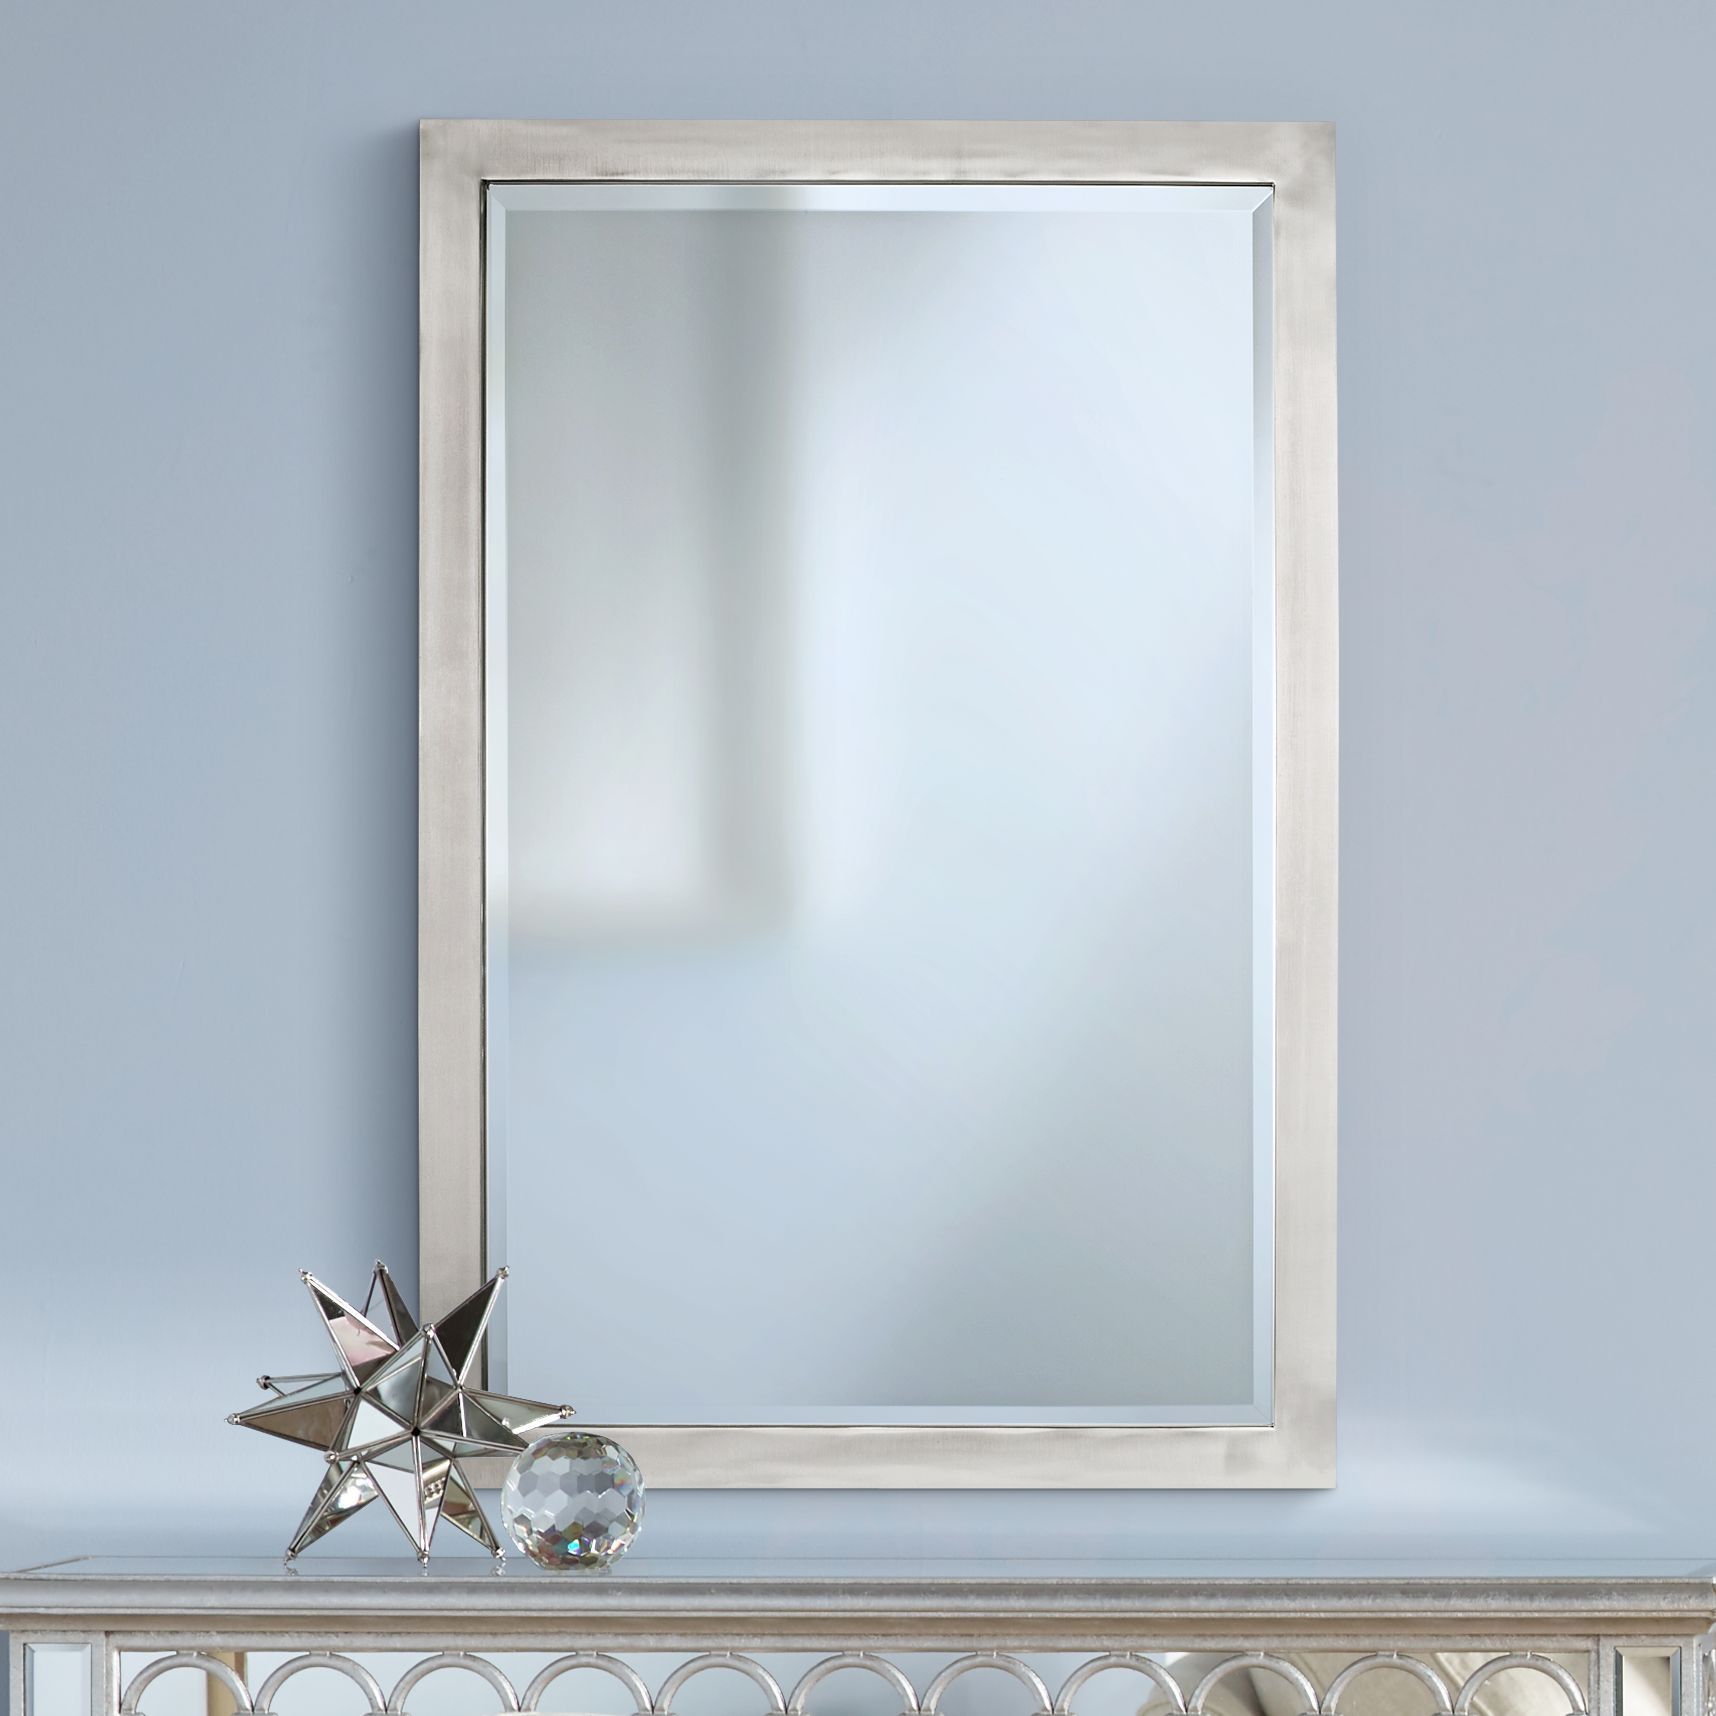 Metzeo 33" X 22" Brushed Nickel Wall Mirror – #t4543 | Lamps Plus In Within Oxidized Nickel Wall Mirrors (View 7 of 15)